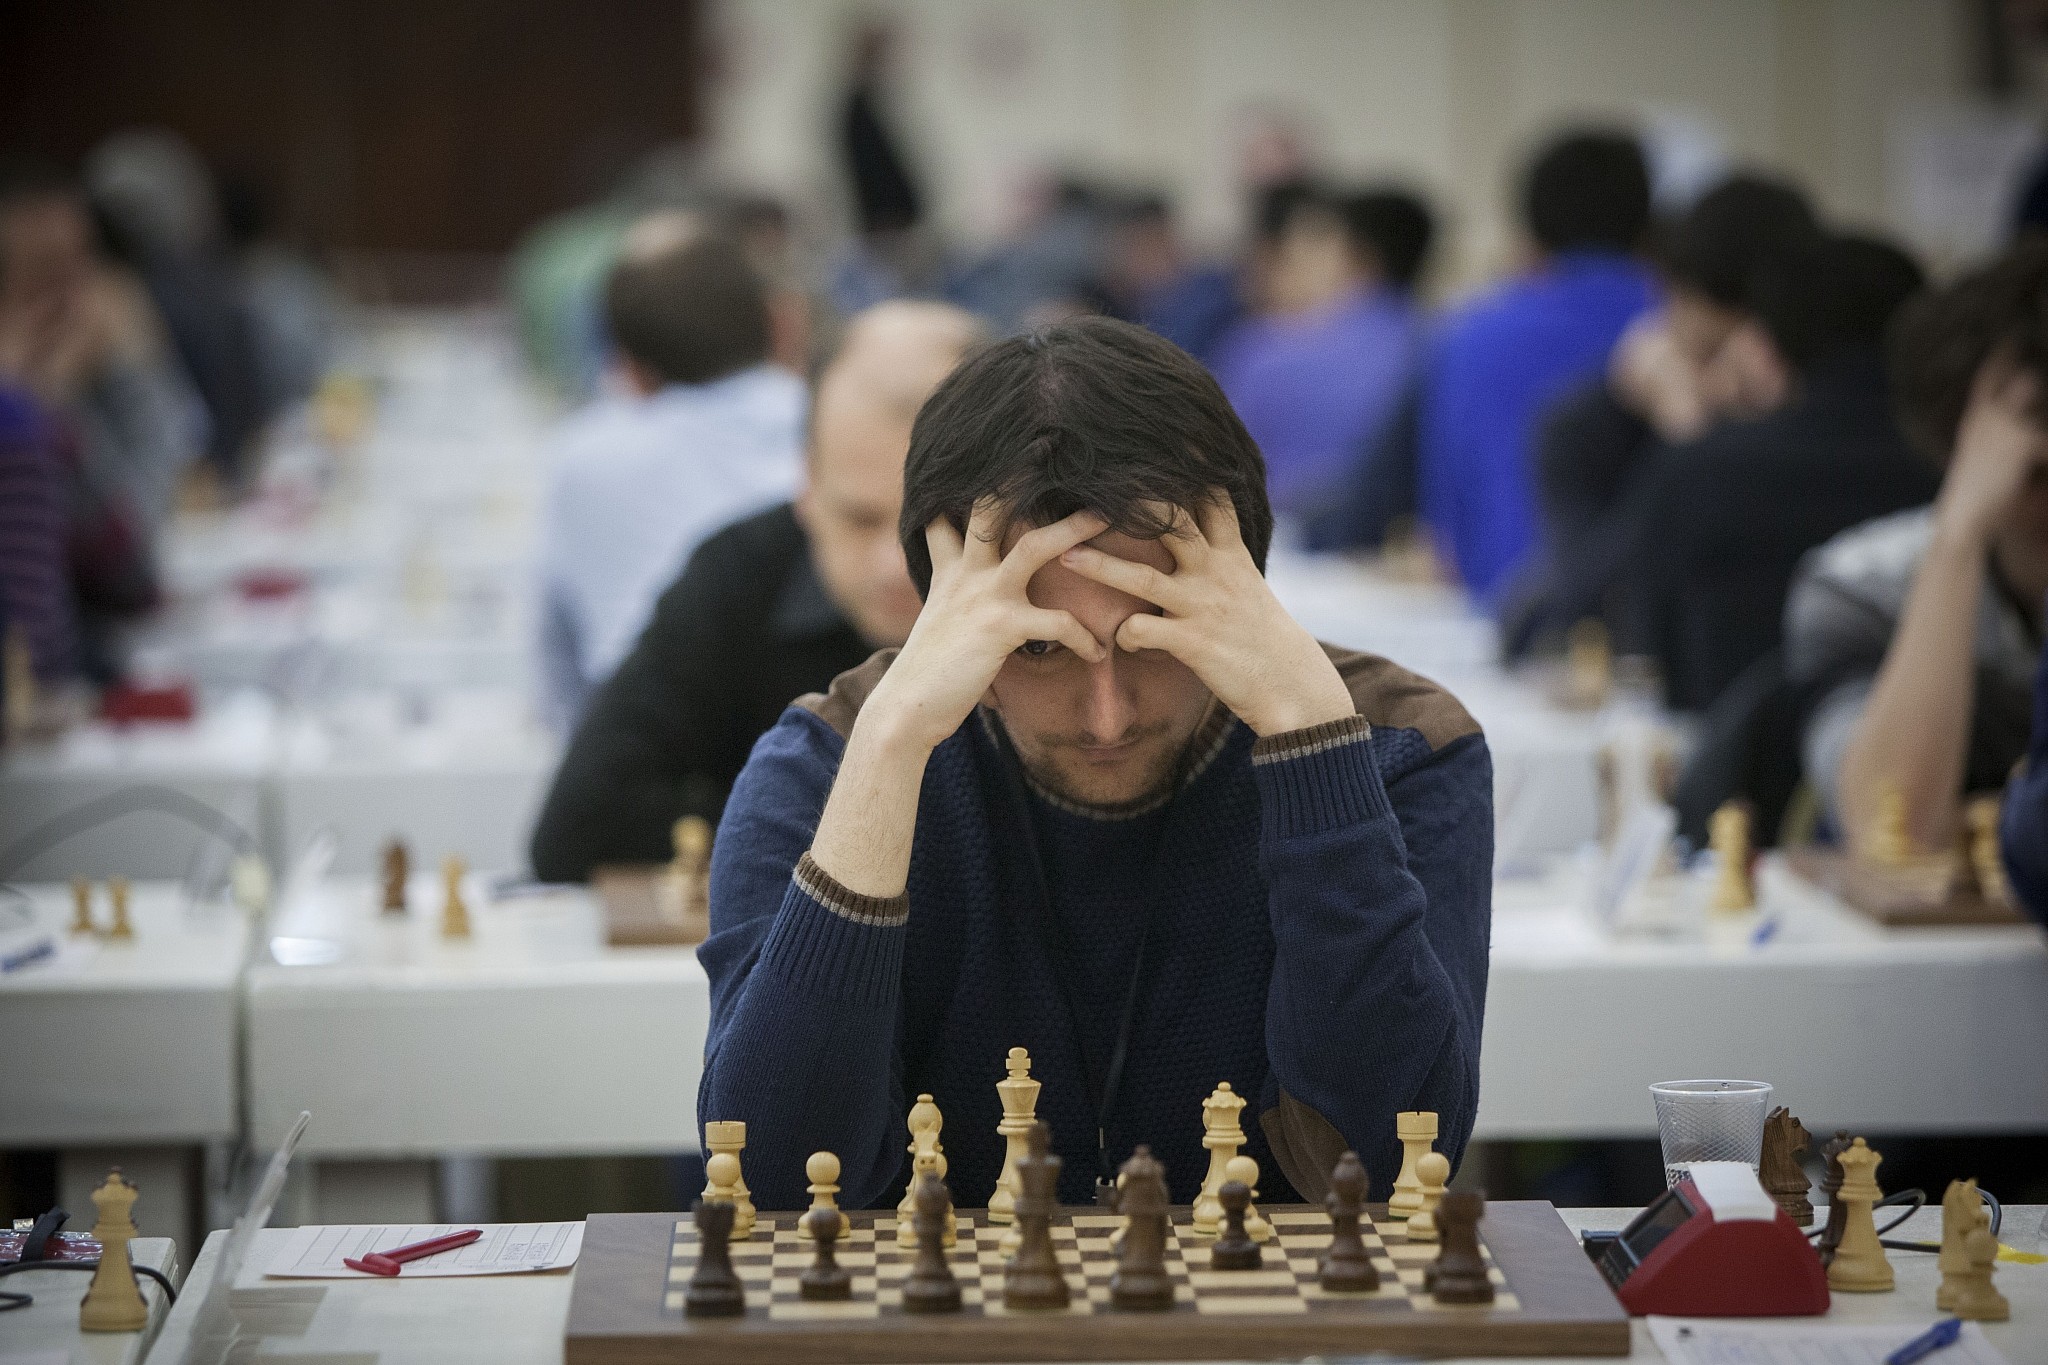 International Chess Federation on X: The action at the FIDE